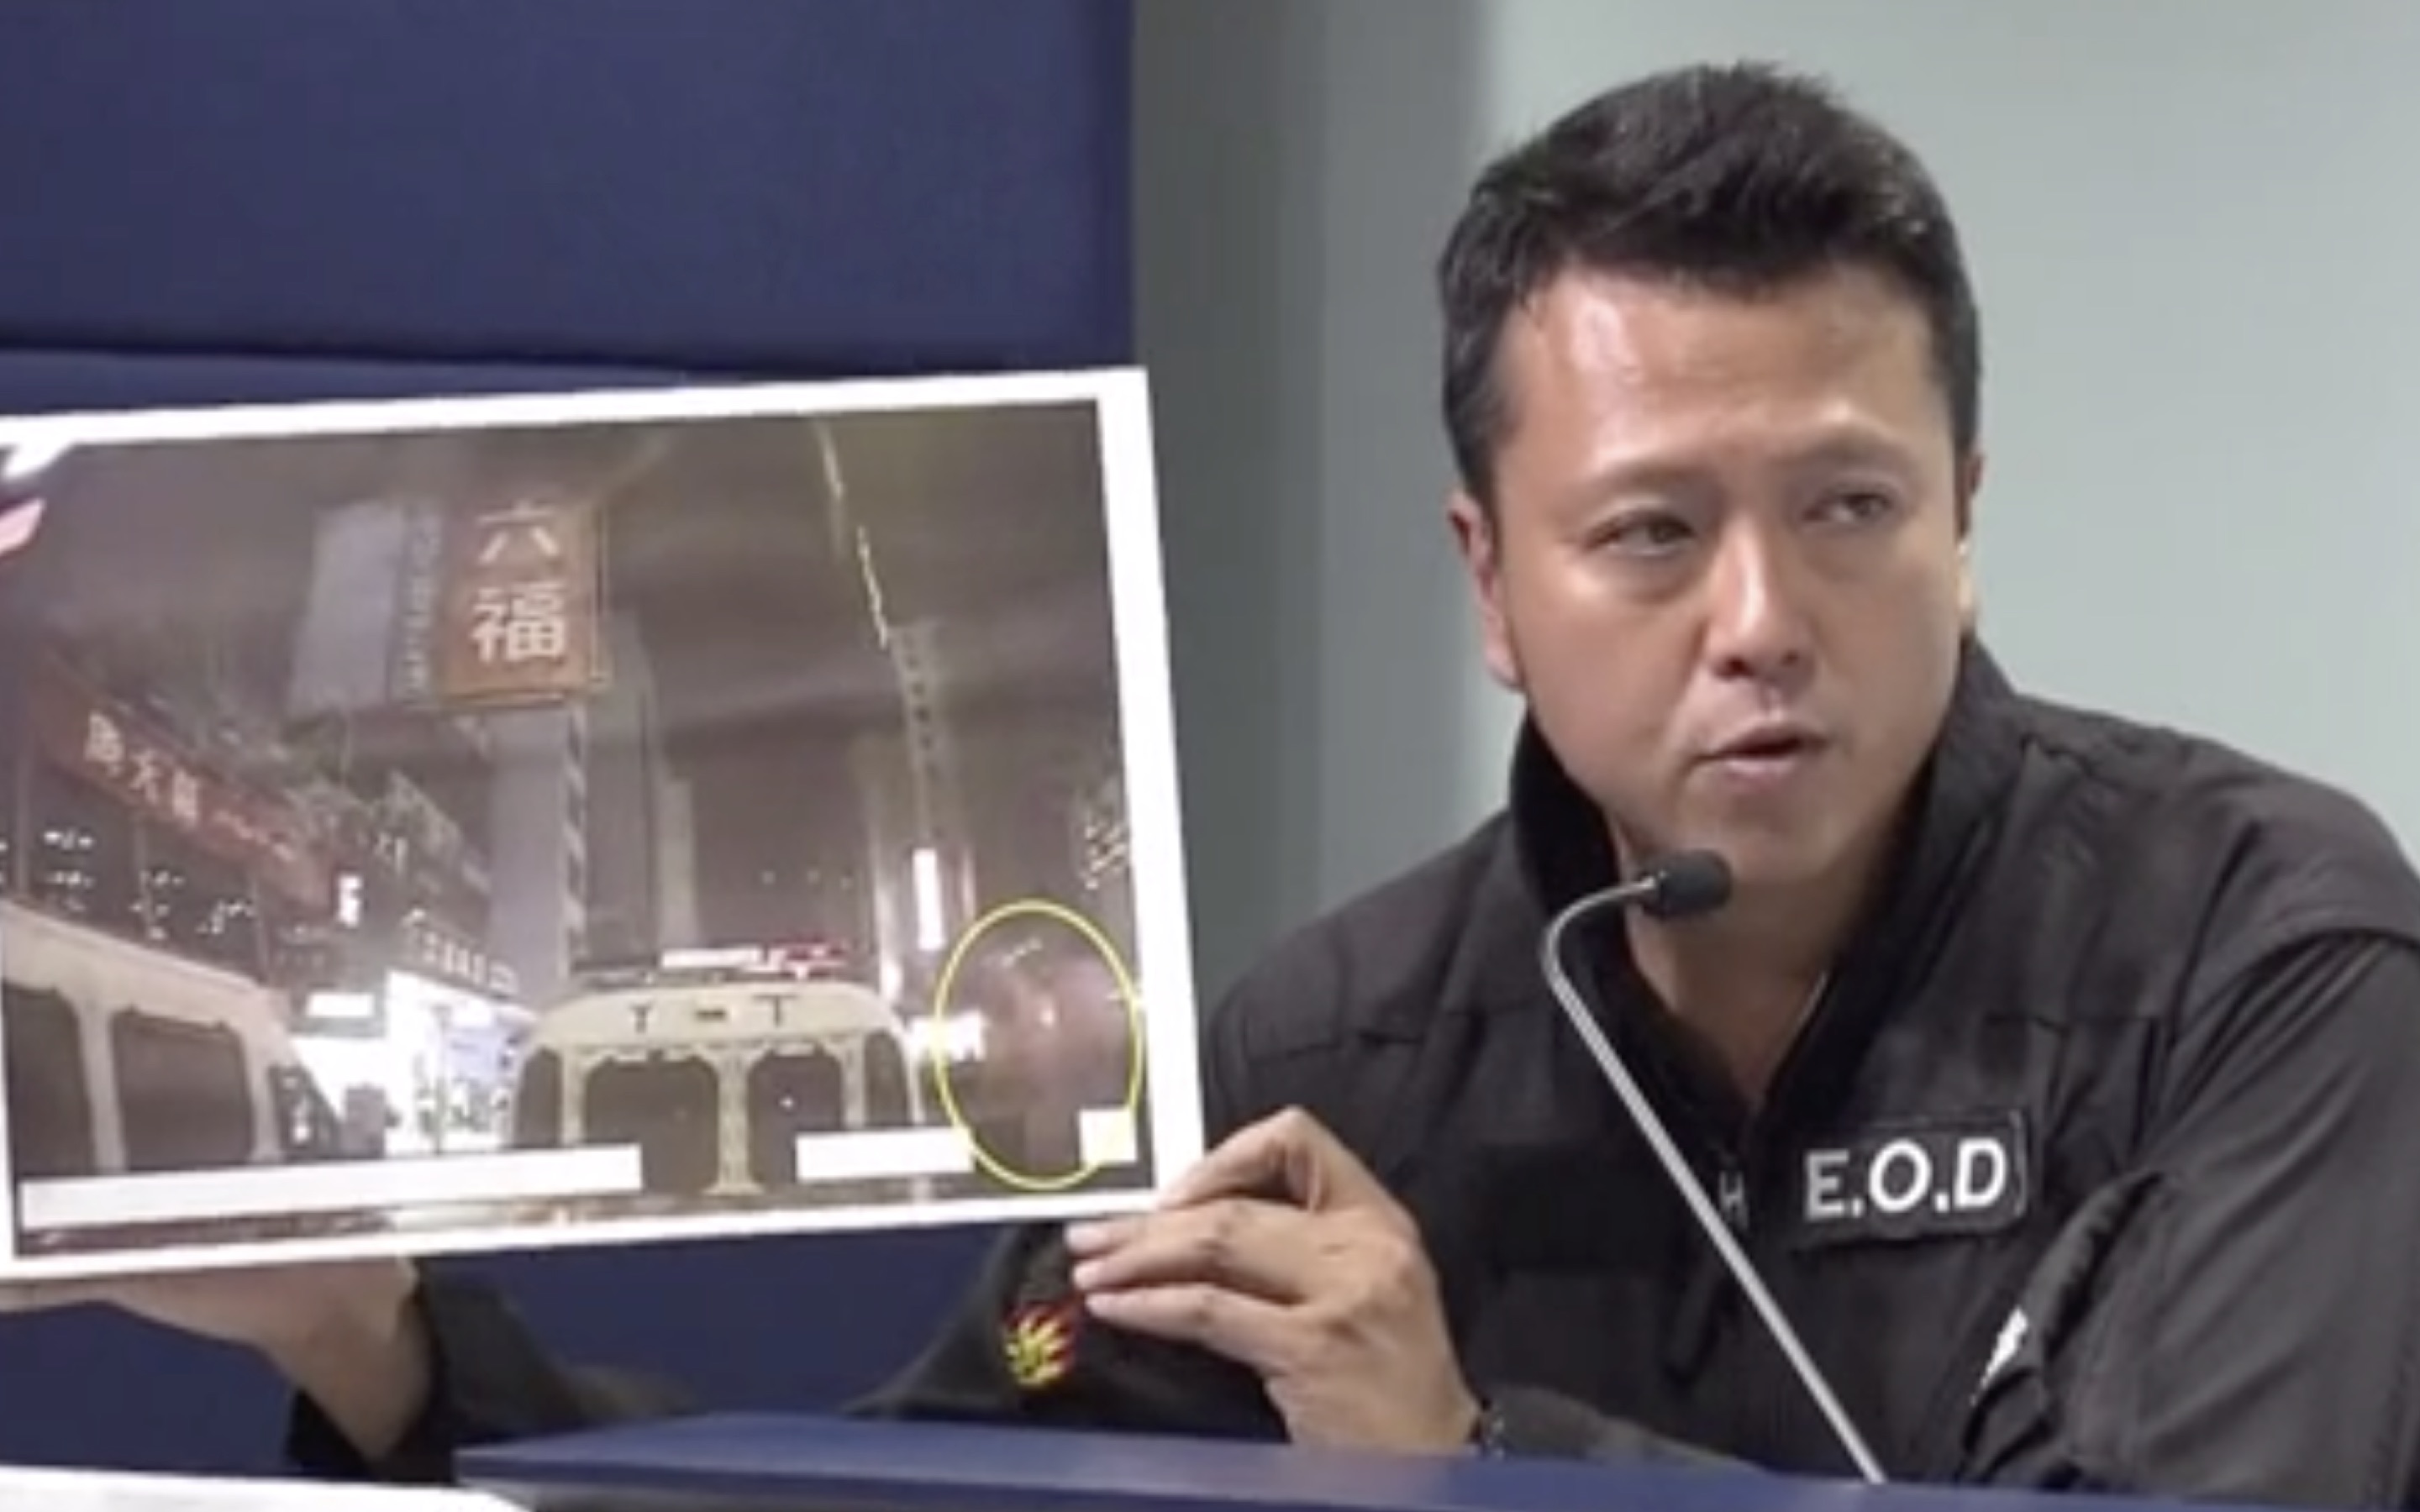 Superintendent Suryanto Chin-chiu of Explosive Ordinance Disposal Bureau holds up a photo of what they say was an explosion created through a remote-controlled device. Screengrab via Facebook/Now News.